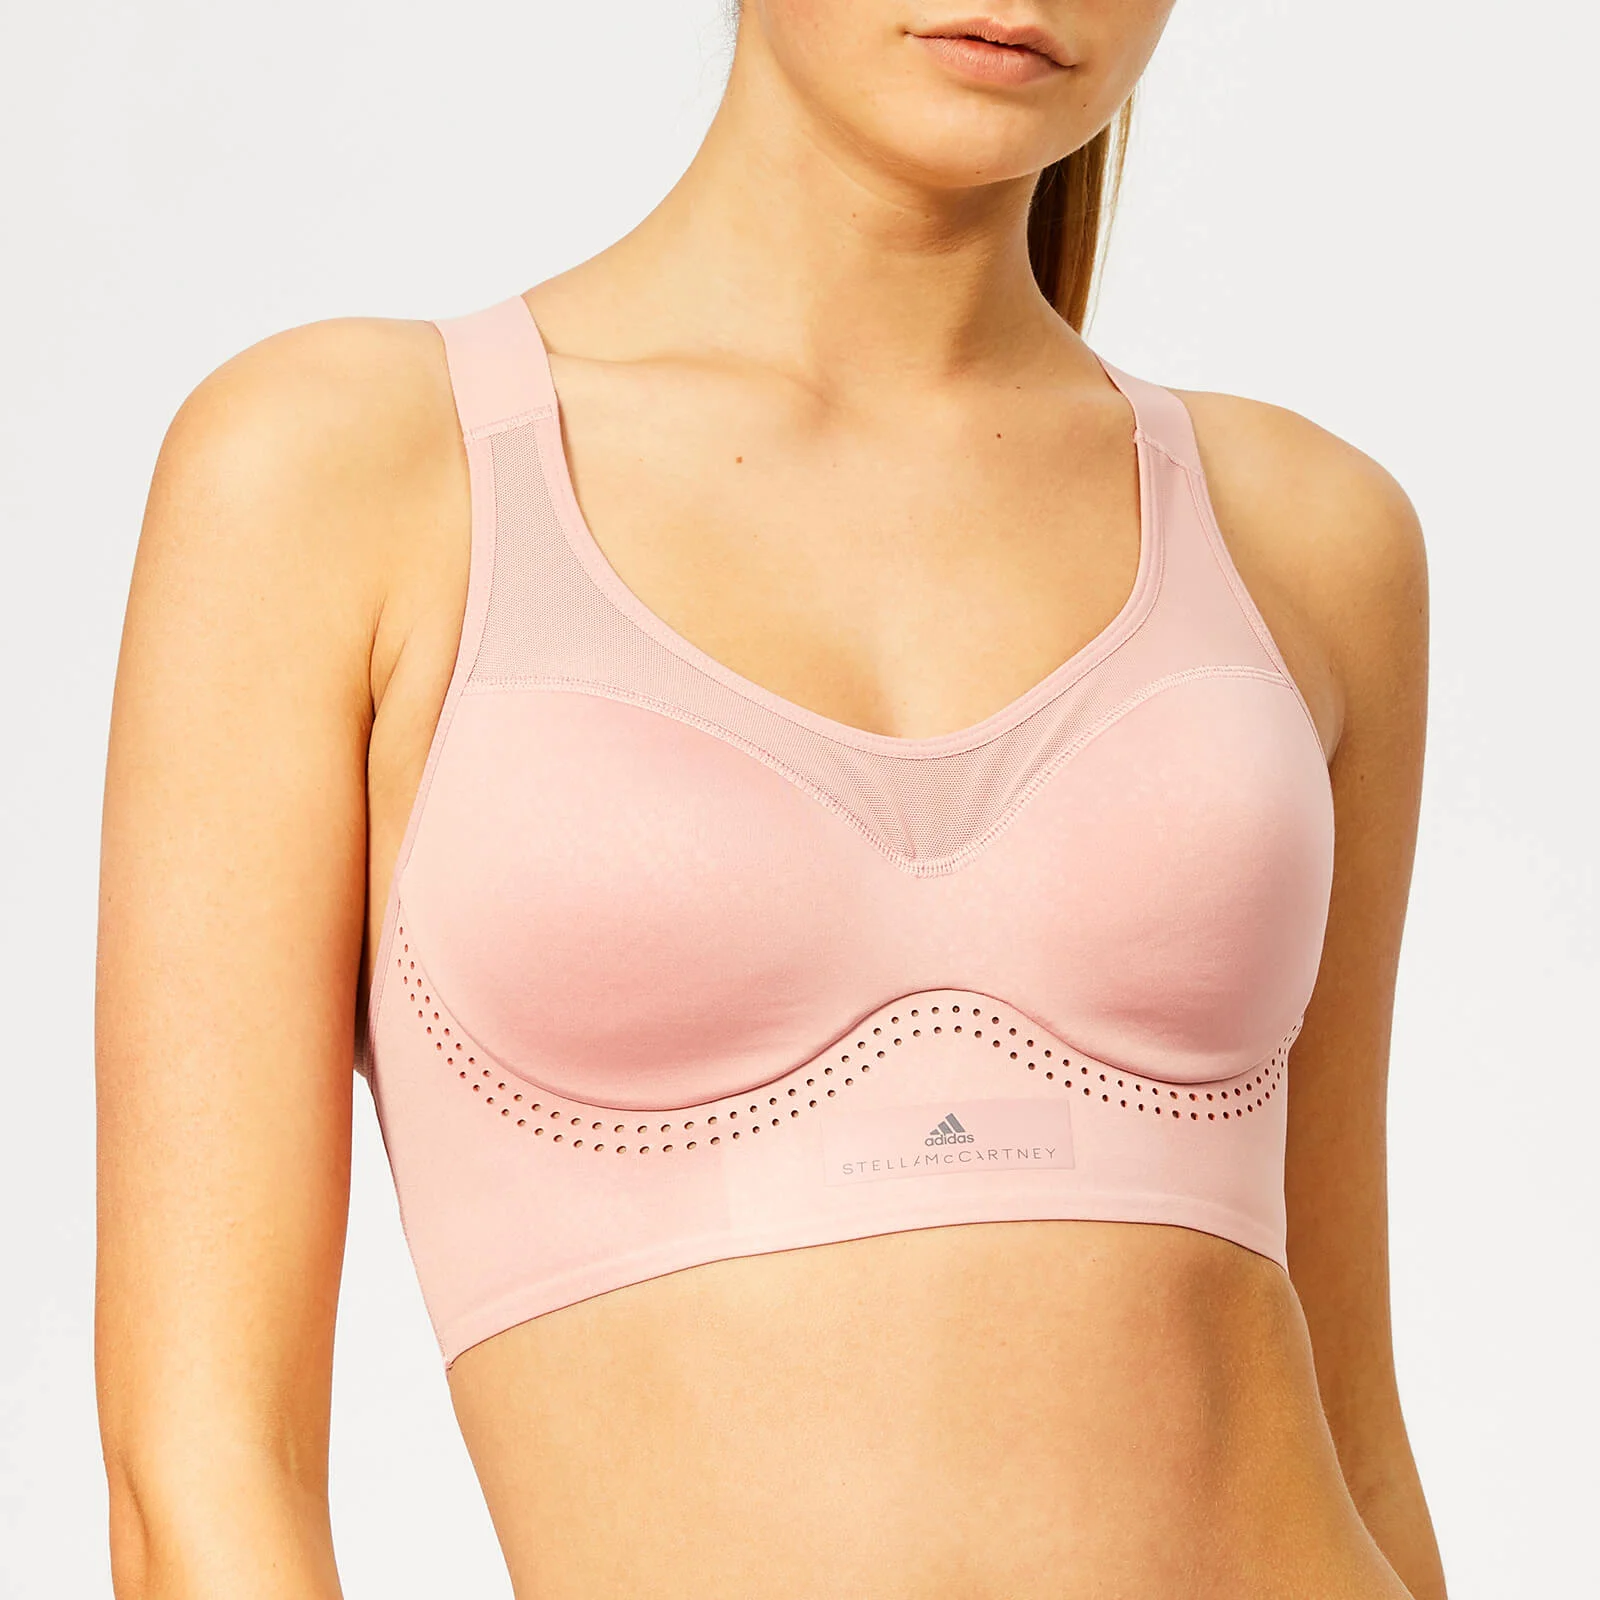 adidas by Stella McCartney Women's Stronger for It Soft Bra - Band Aid Pink Image 1